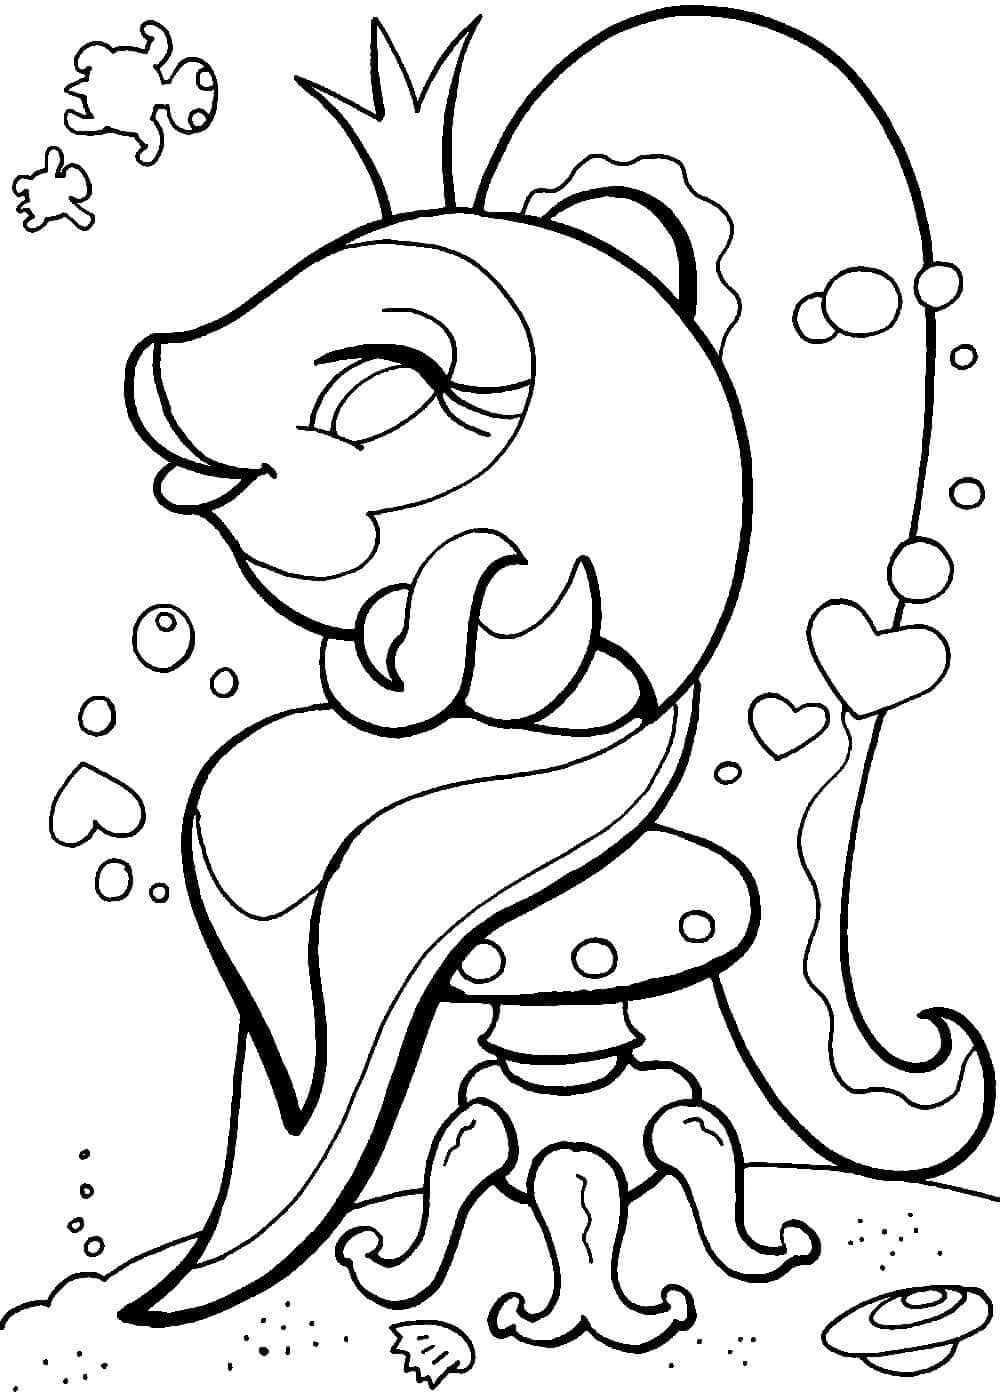 Beau Poisson Rouge coloring page